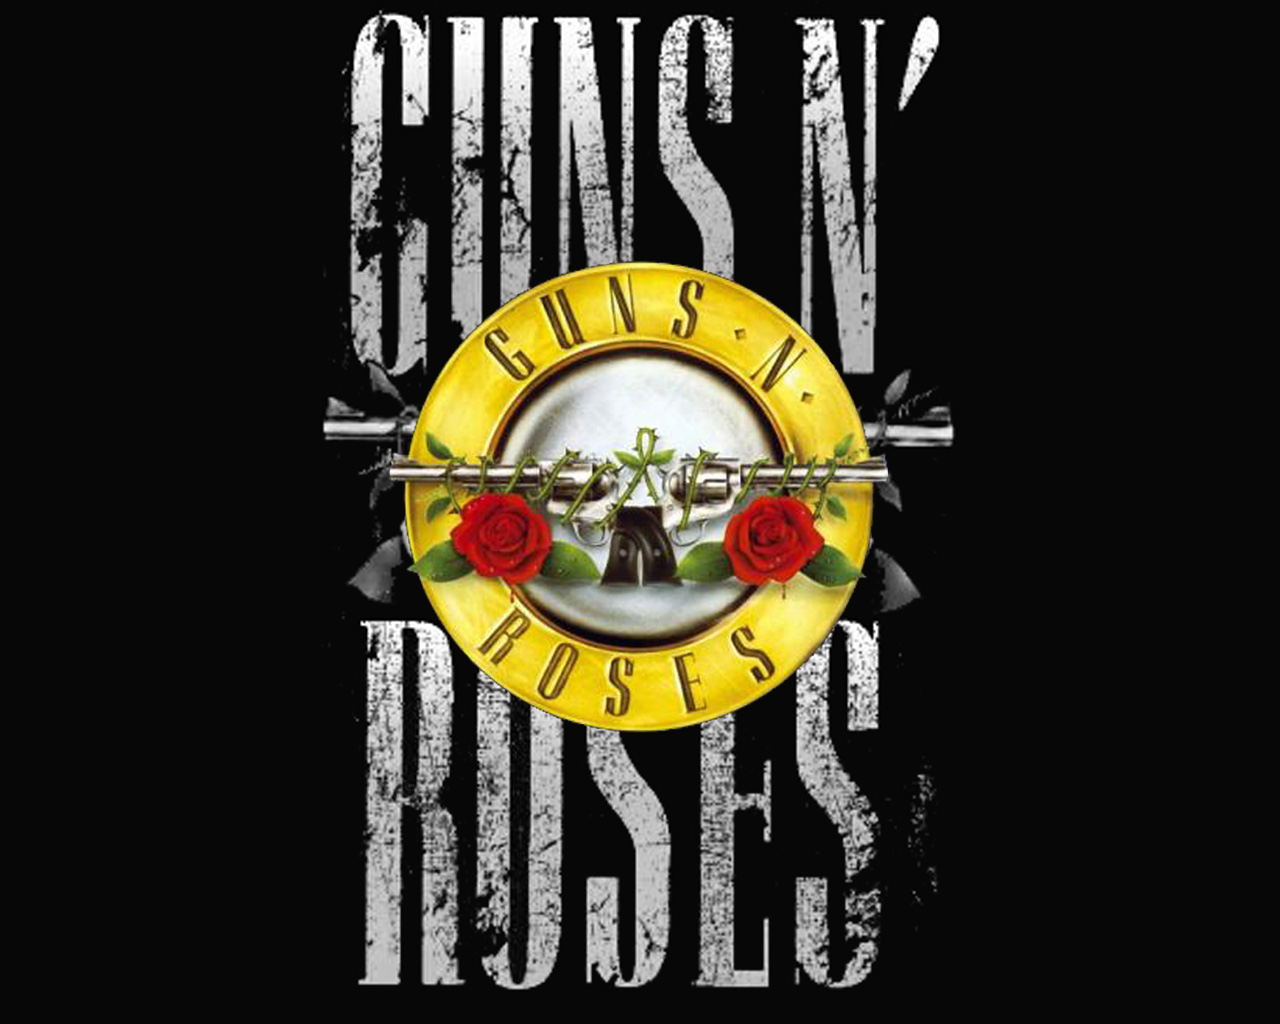 Guns N' Roses Backgrounds, Compatible - PC, Mobile, Gadgets| 1280x1024 px